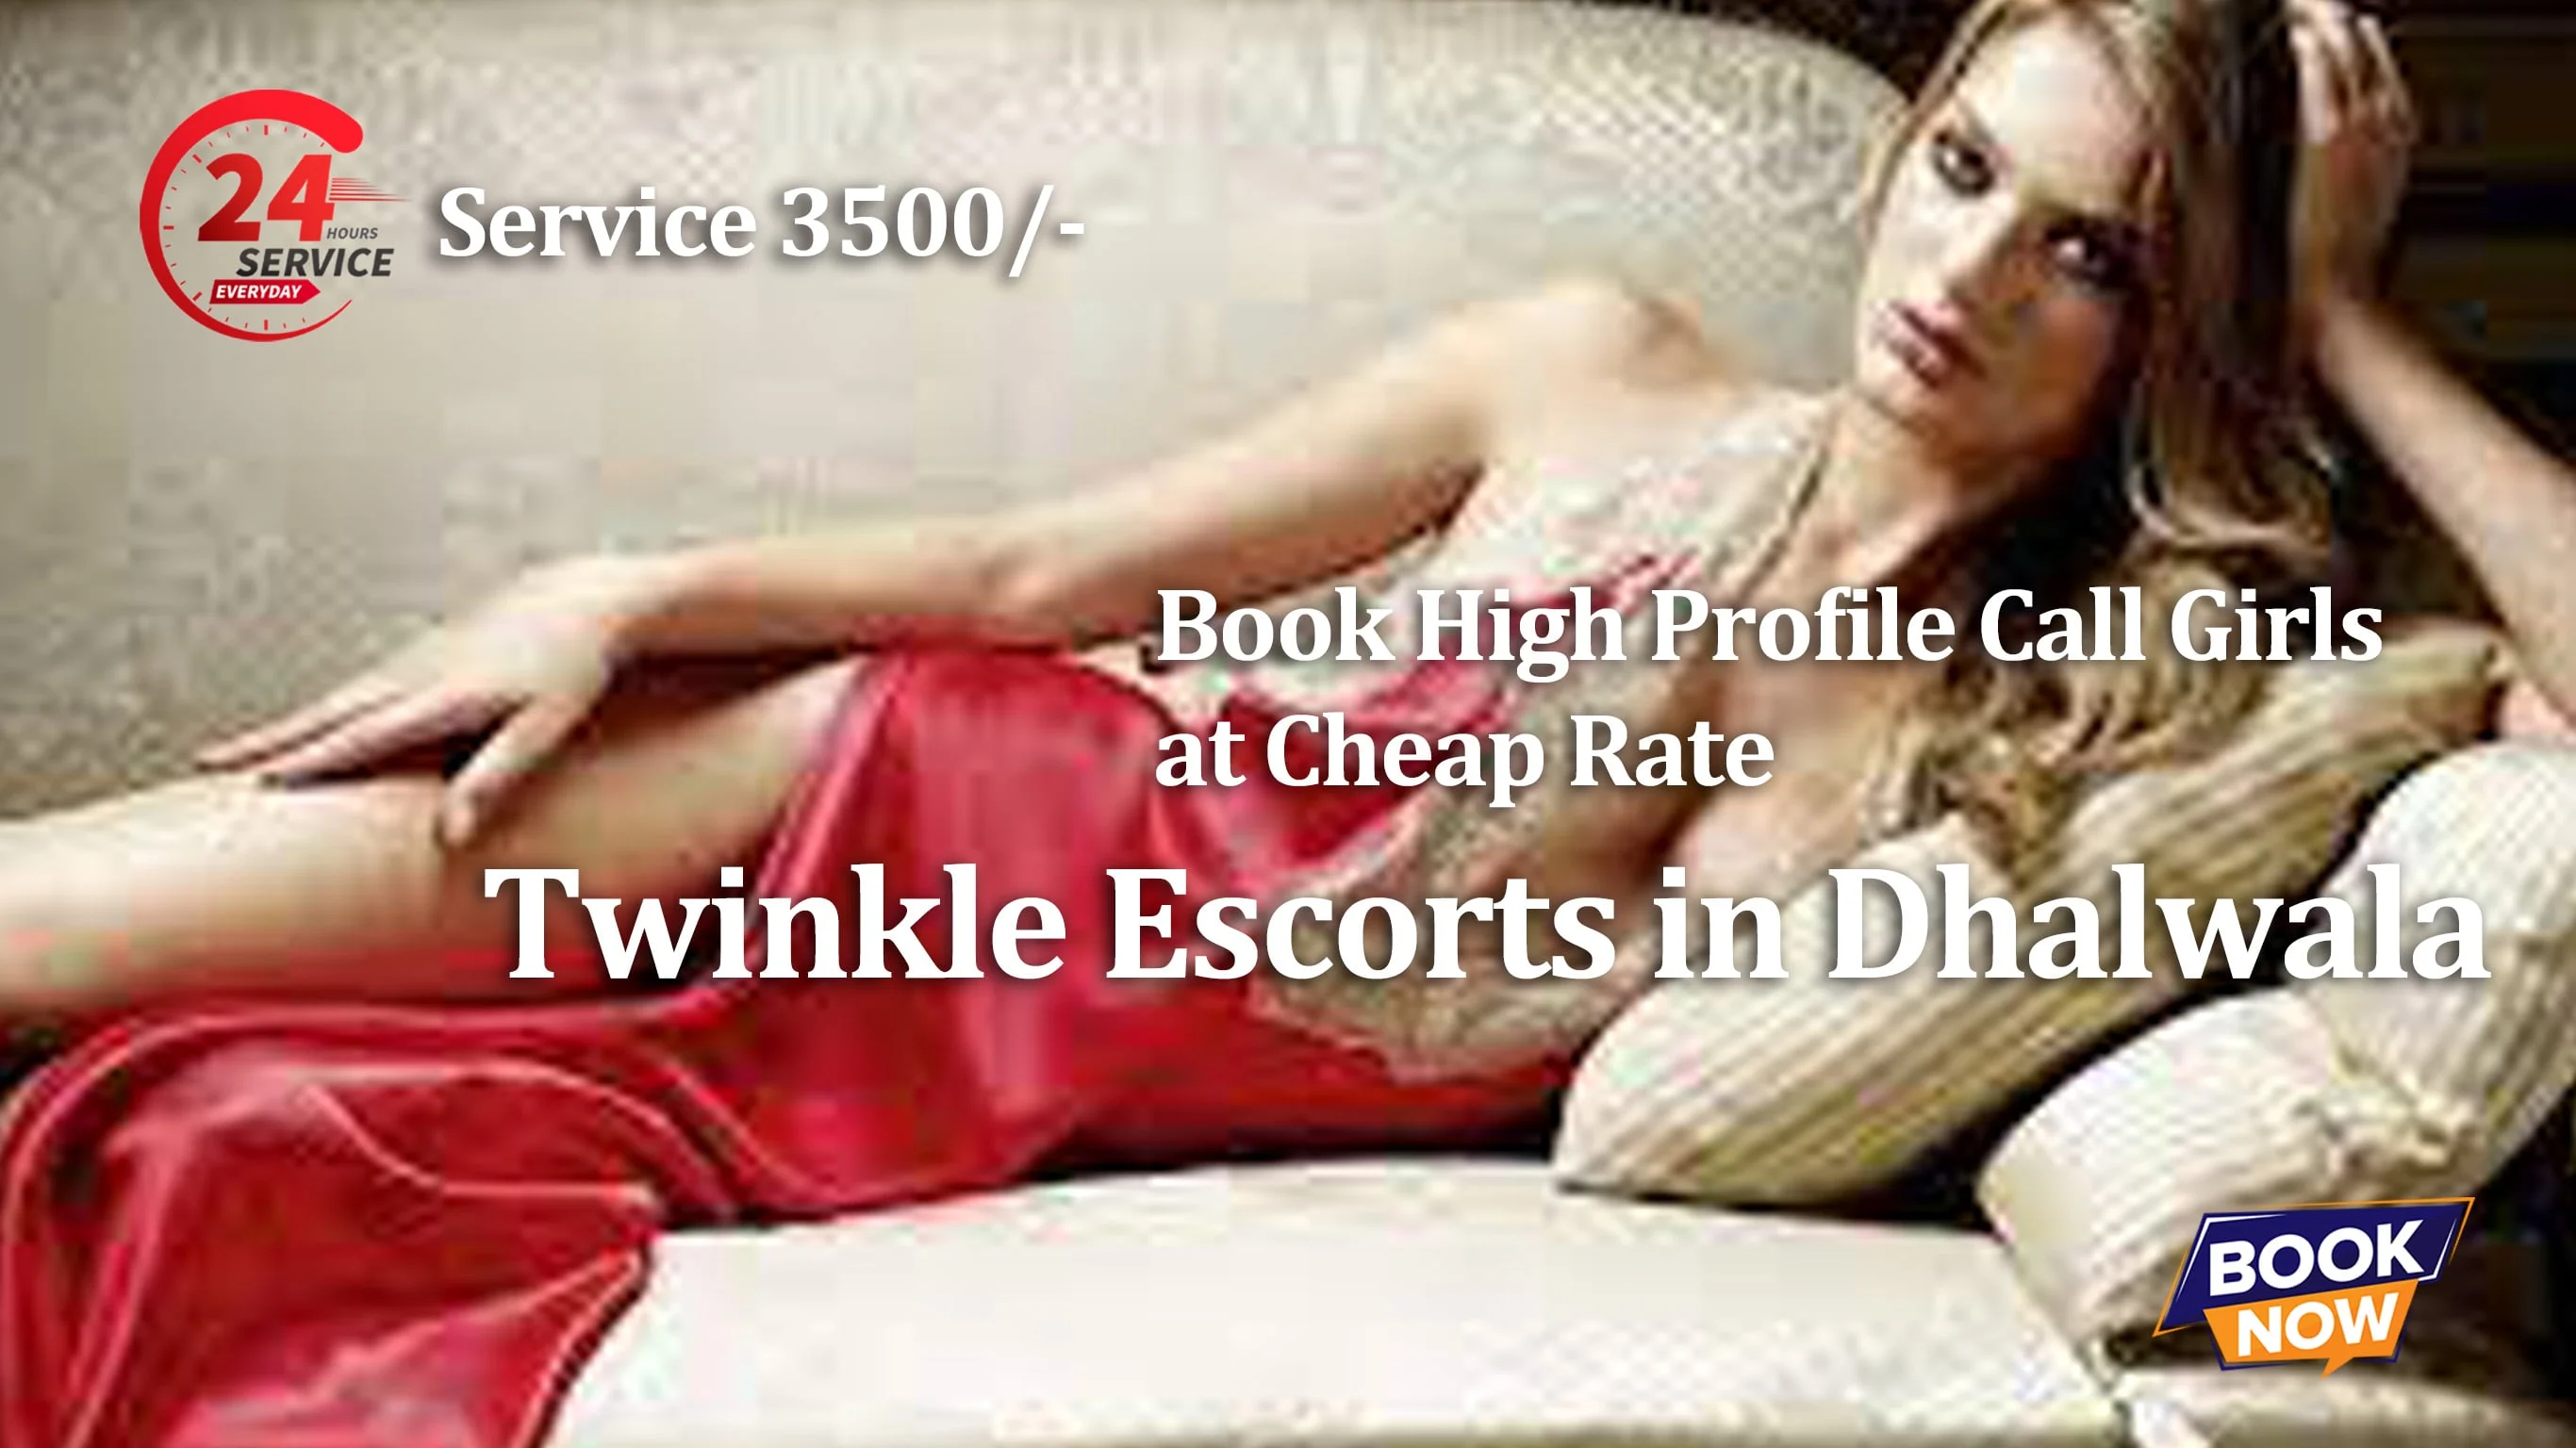 Dhalwala Escort give description of twinkle escort service charges